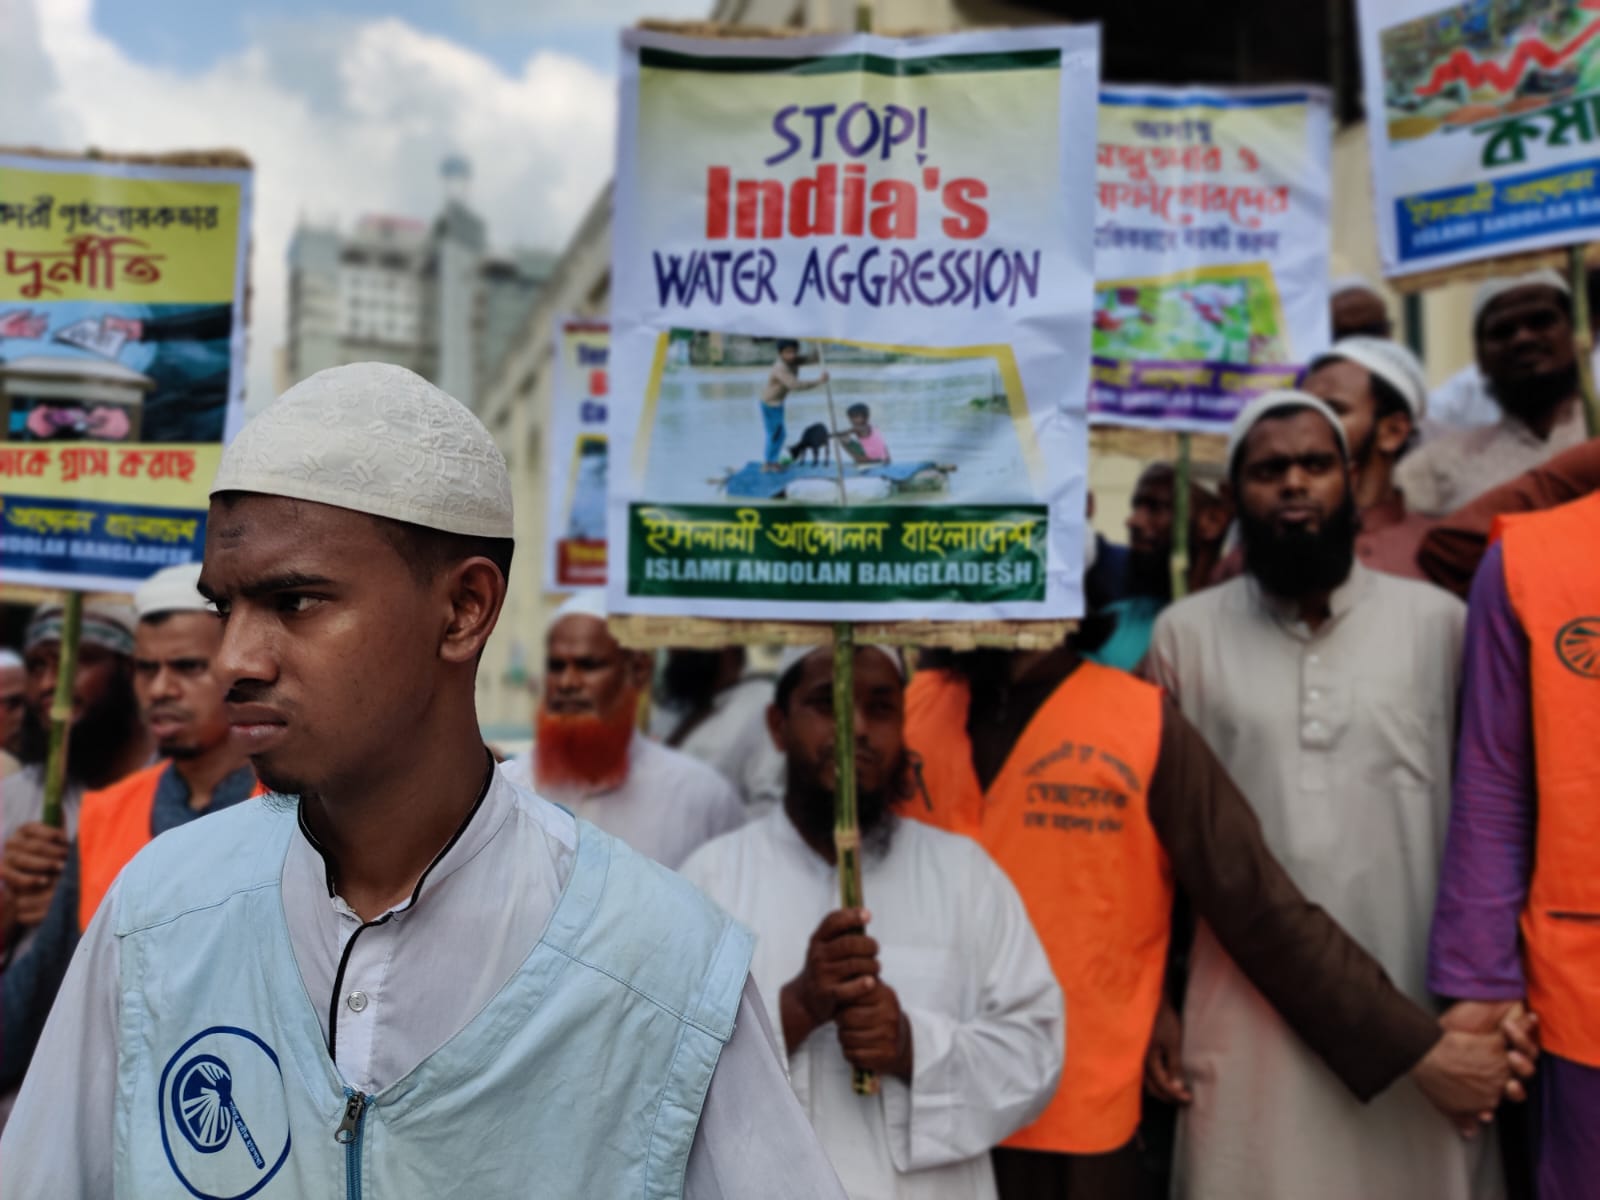 Thousands in Bangladesh held grand rally, procession protesting water aggression by India